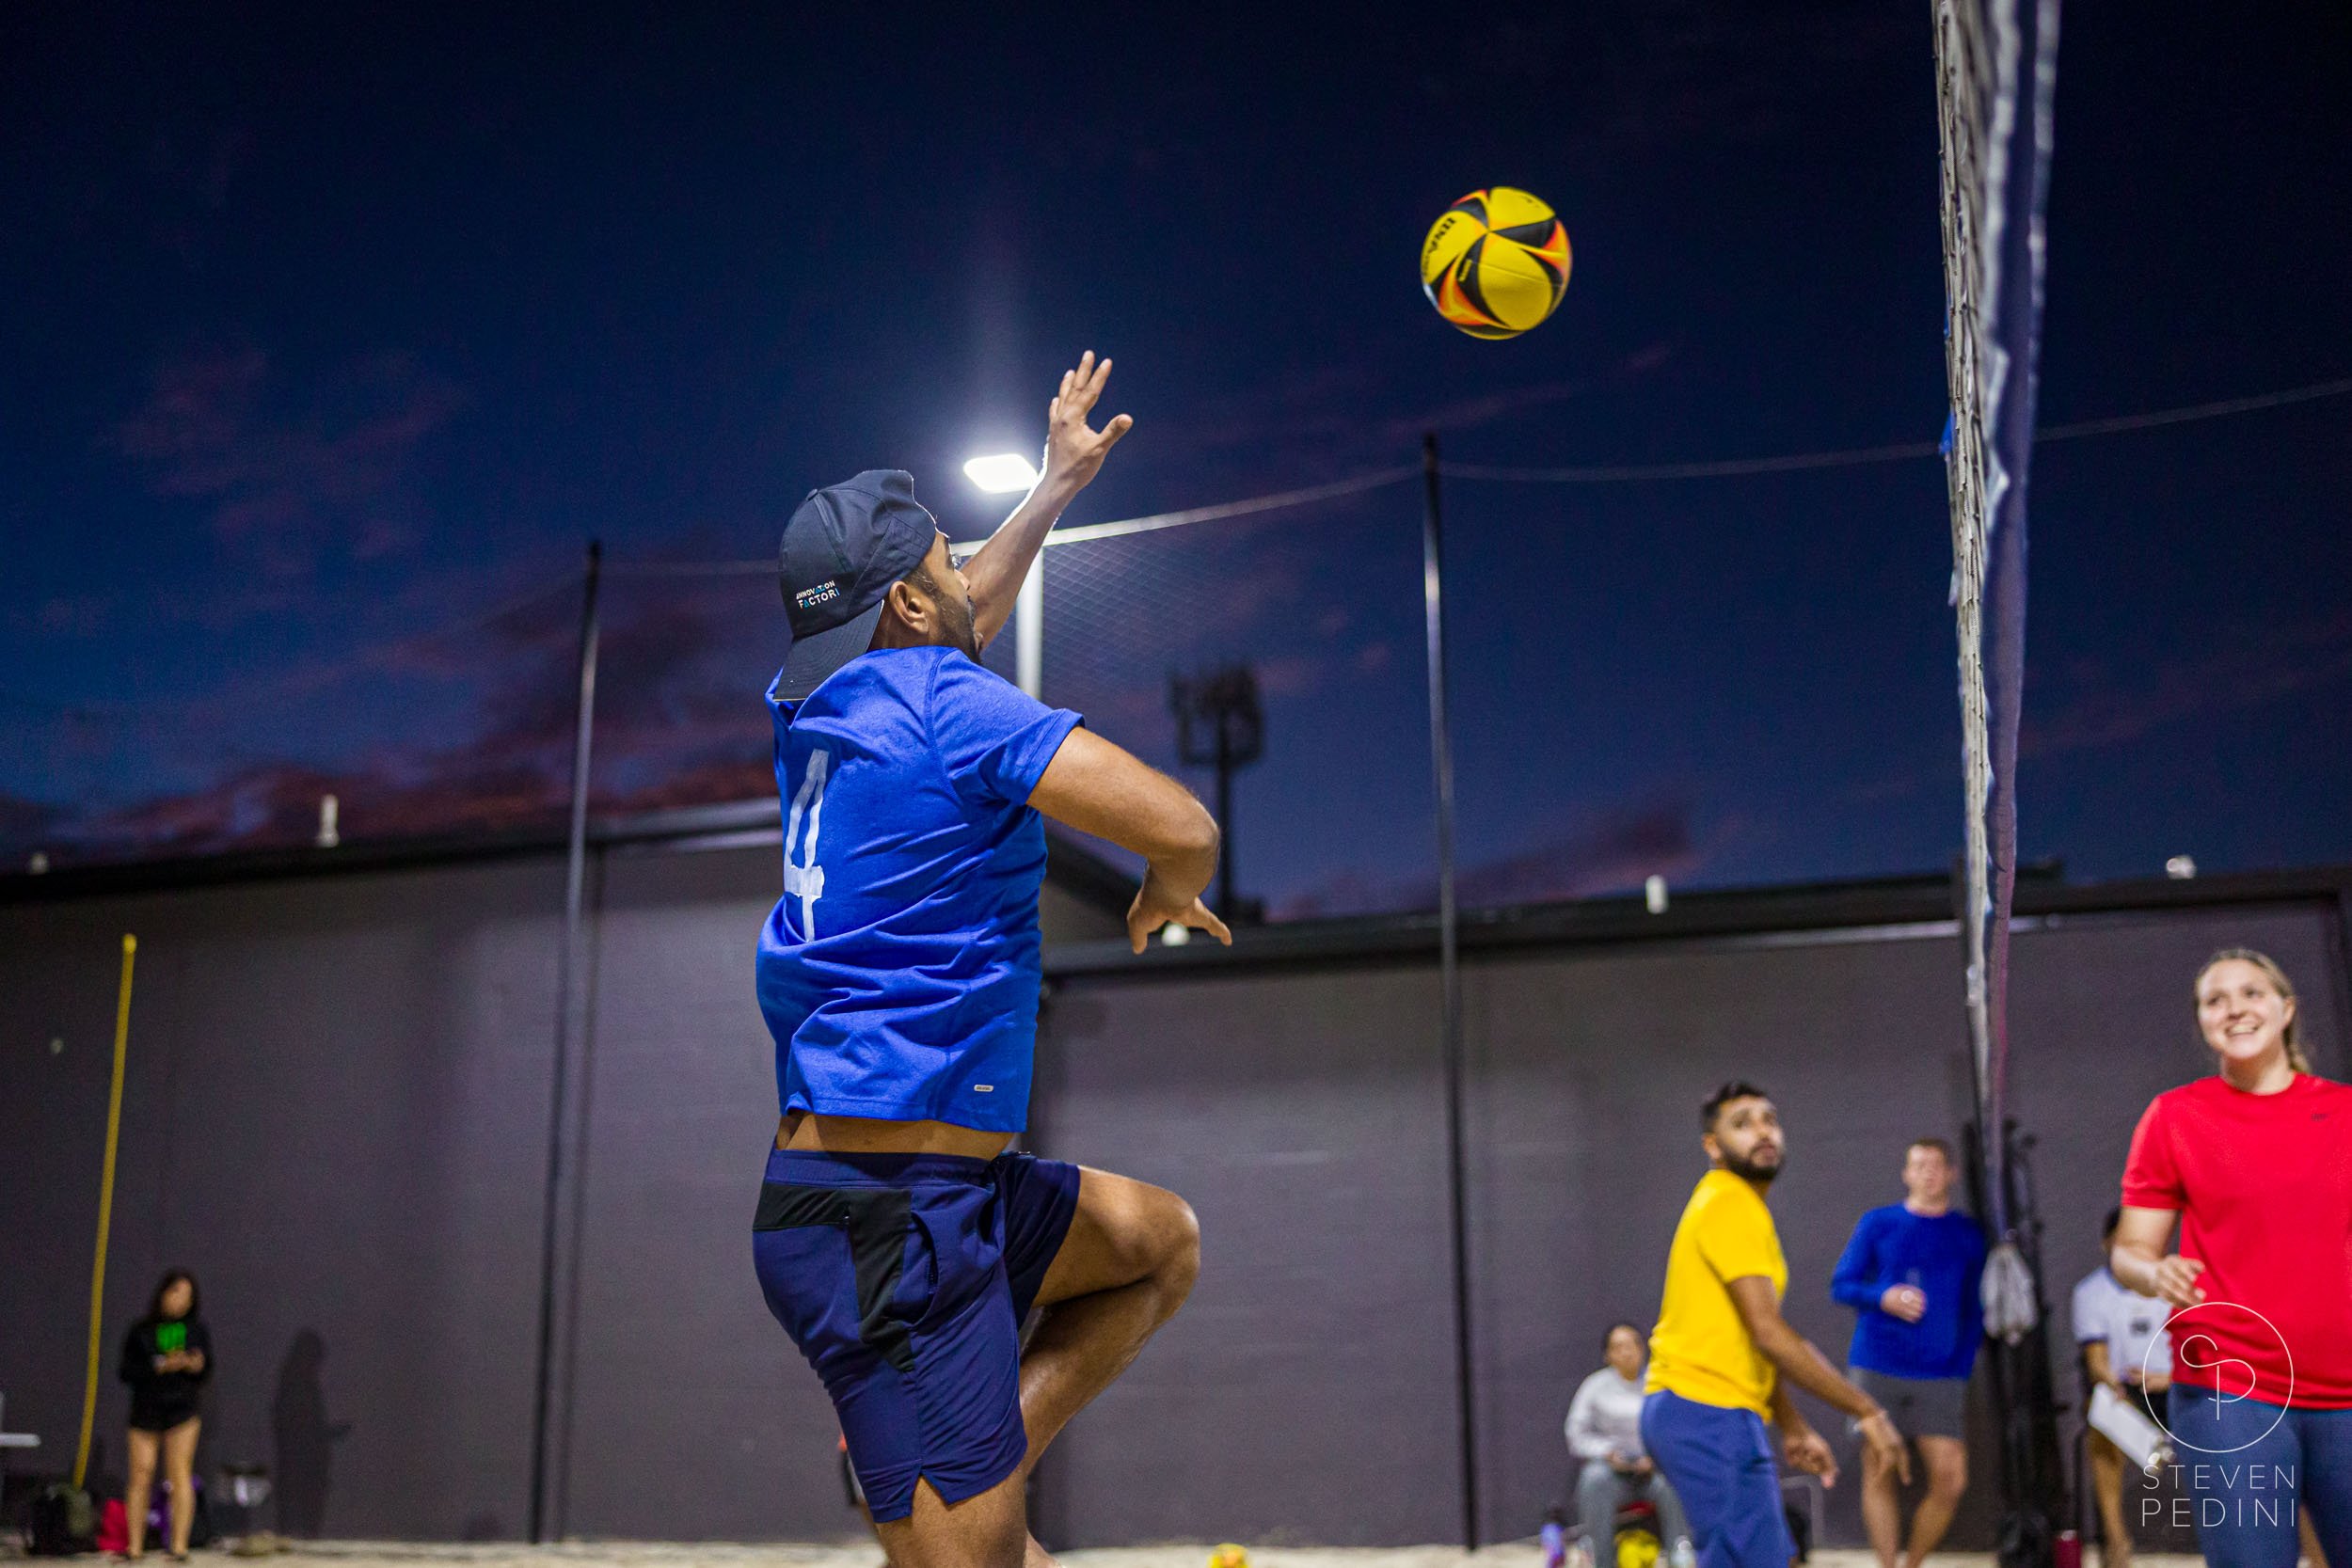 Steven Pedini Photography - Bumpy Pickle - Sand Volleyball - Houston TX - World Cup of Volleyball - 00357.jpg